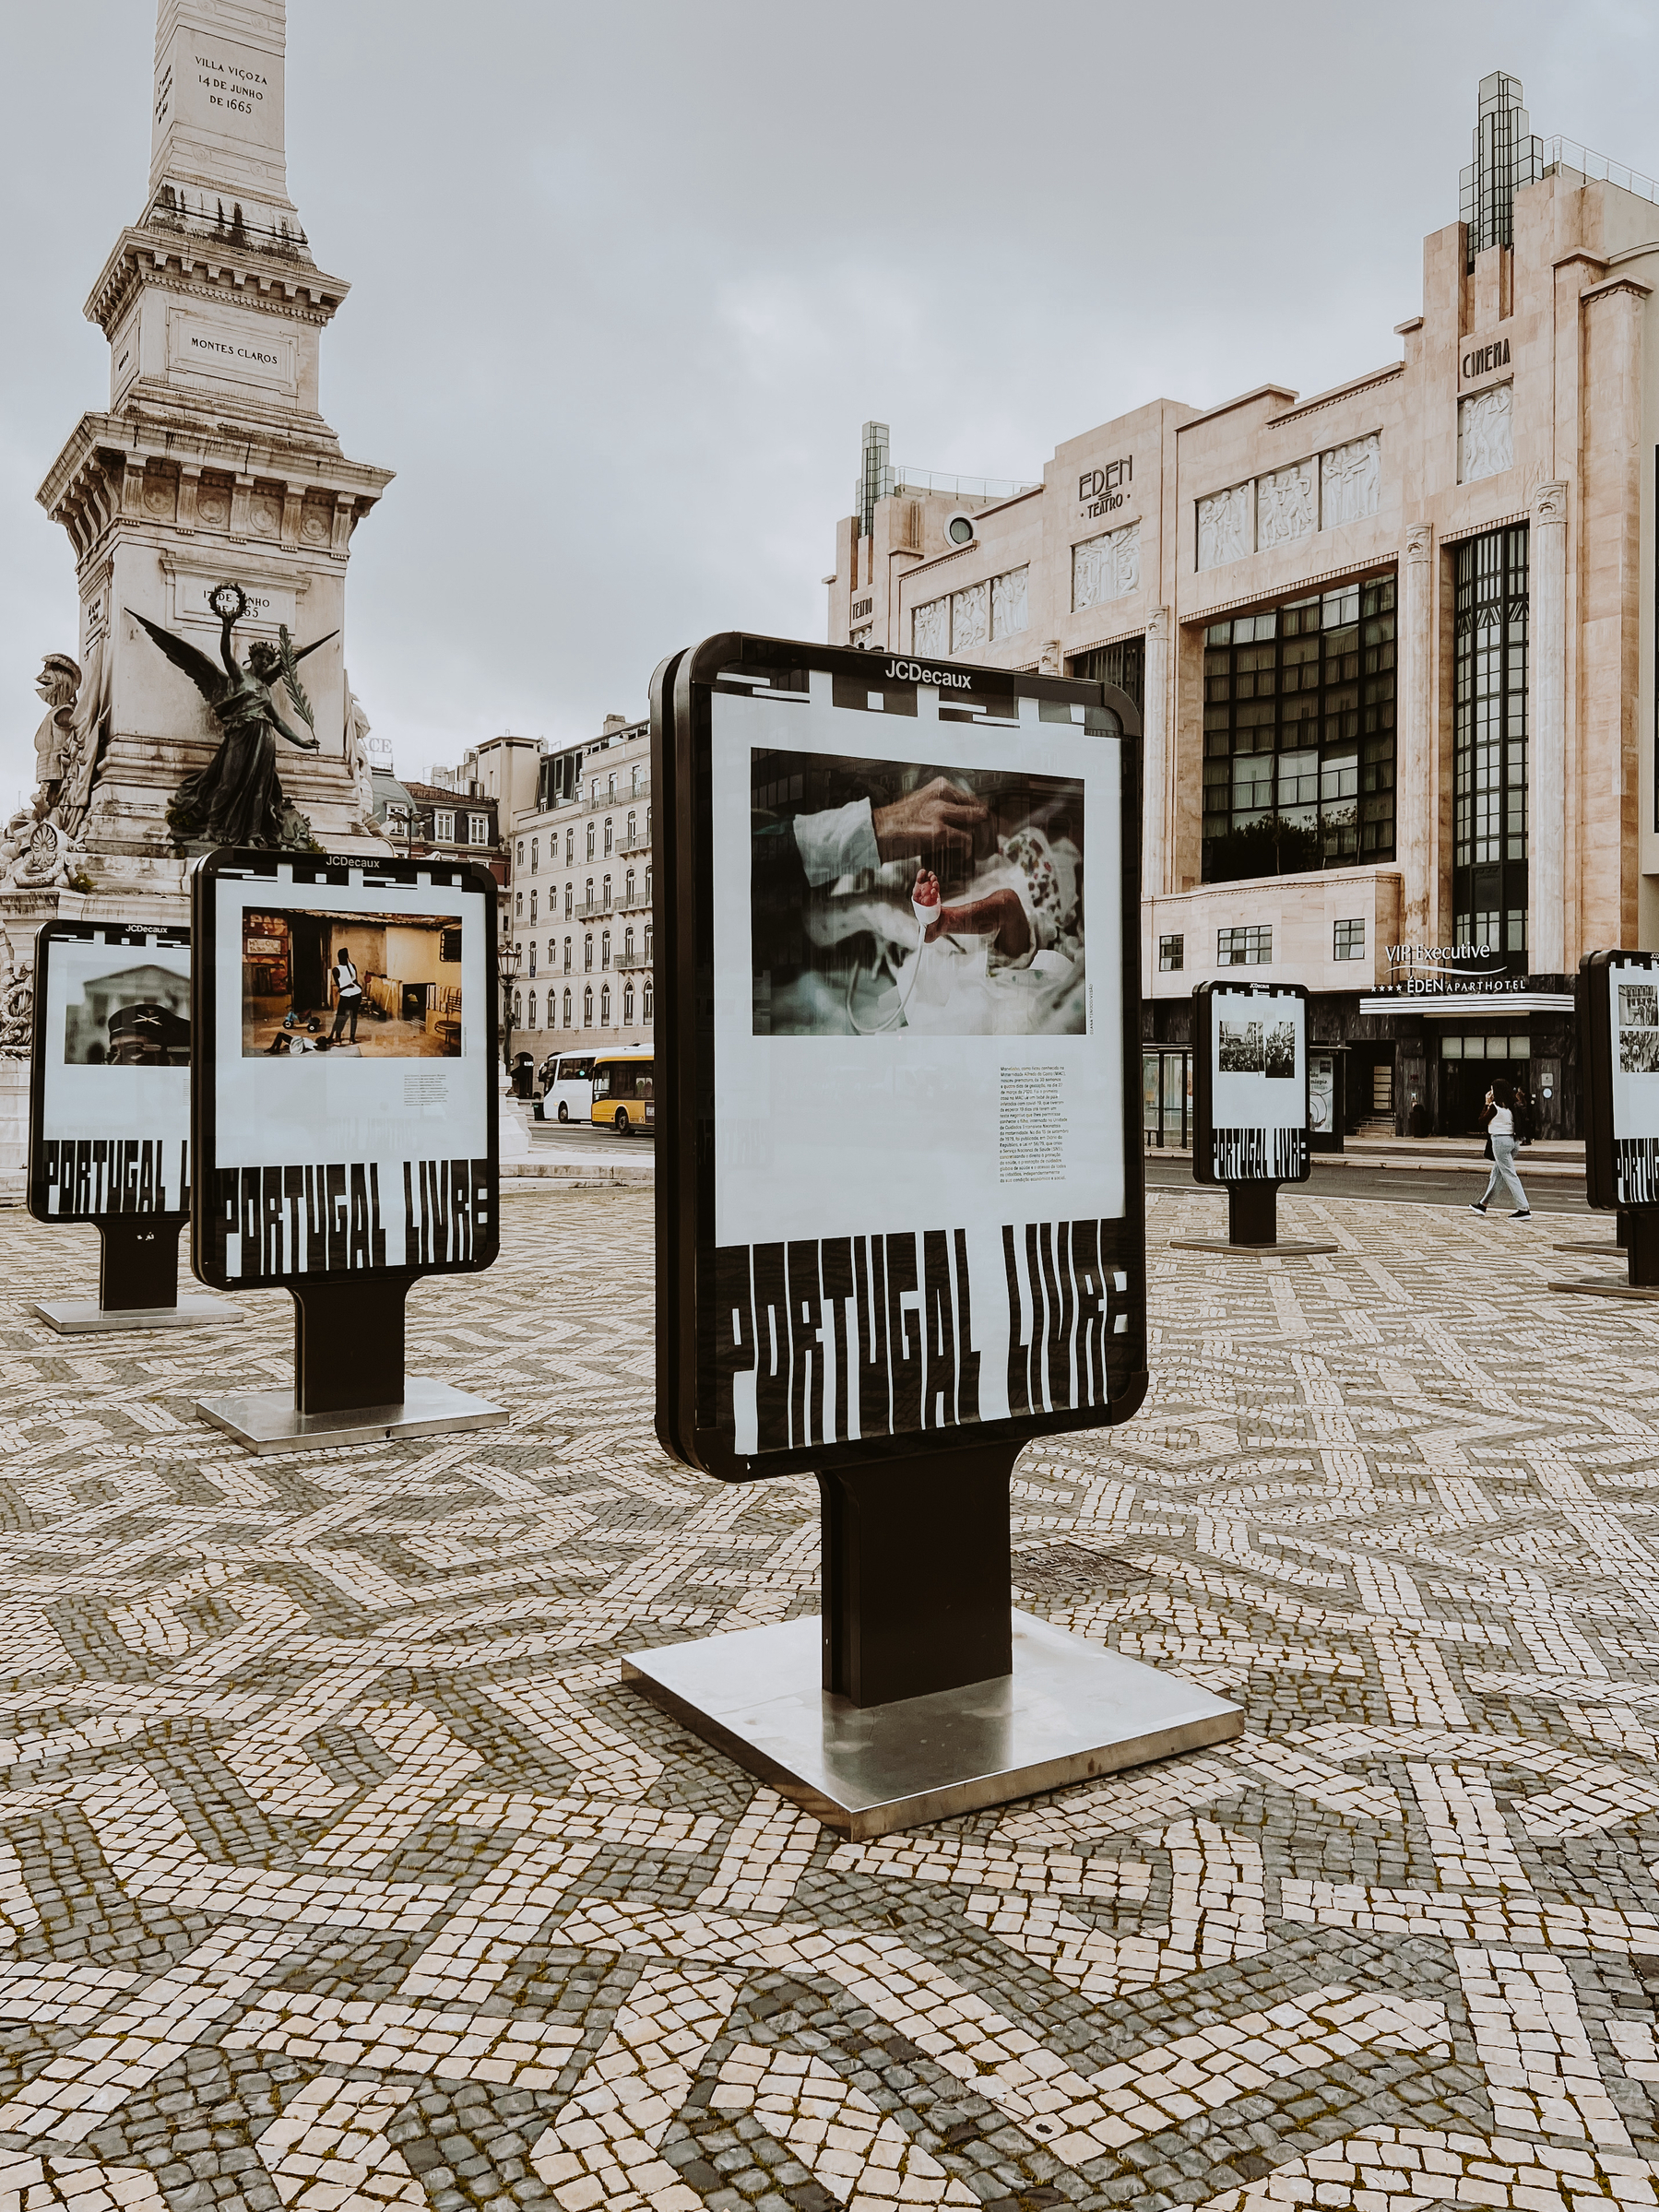 Outdoor exhibition displays with photographs on a public square with cobblestone pavement, and a classical-style monument in the background. Text on the photographs reads &ldquo;PORTUGAL LIVRE.&quot;